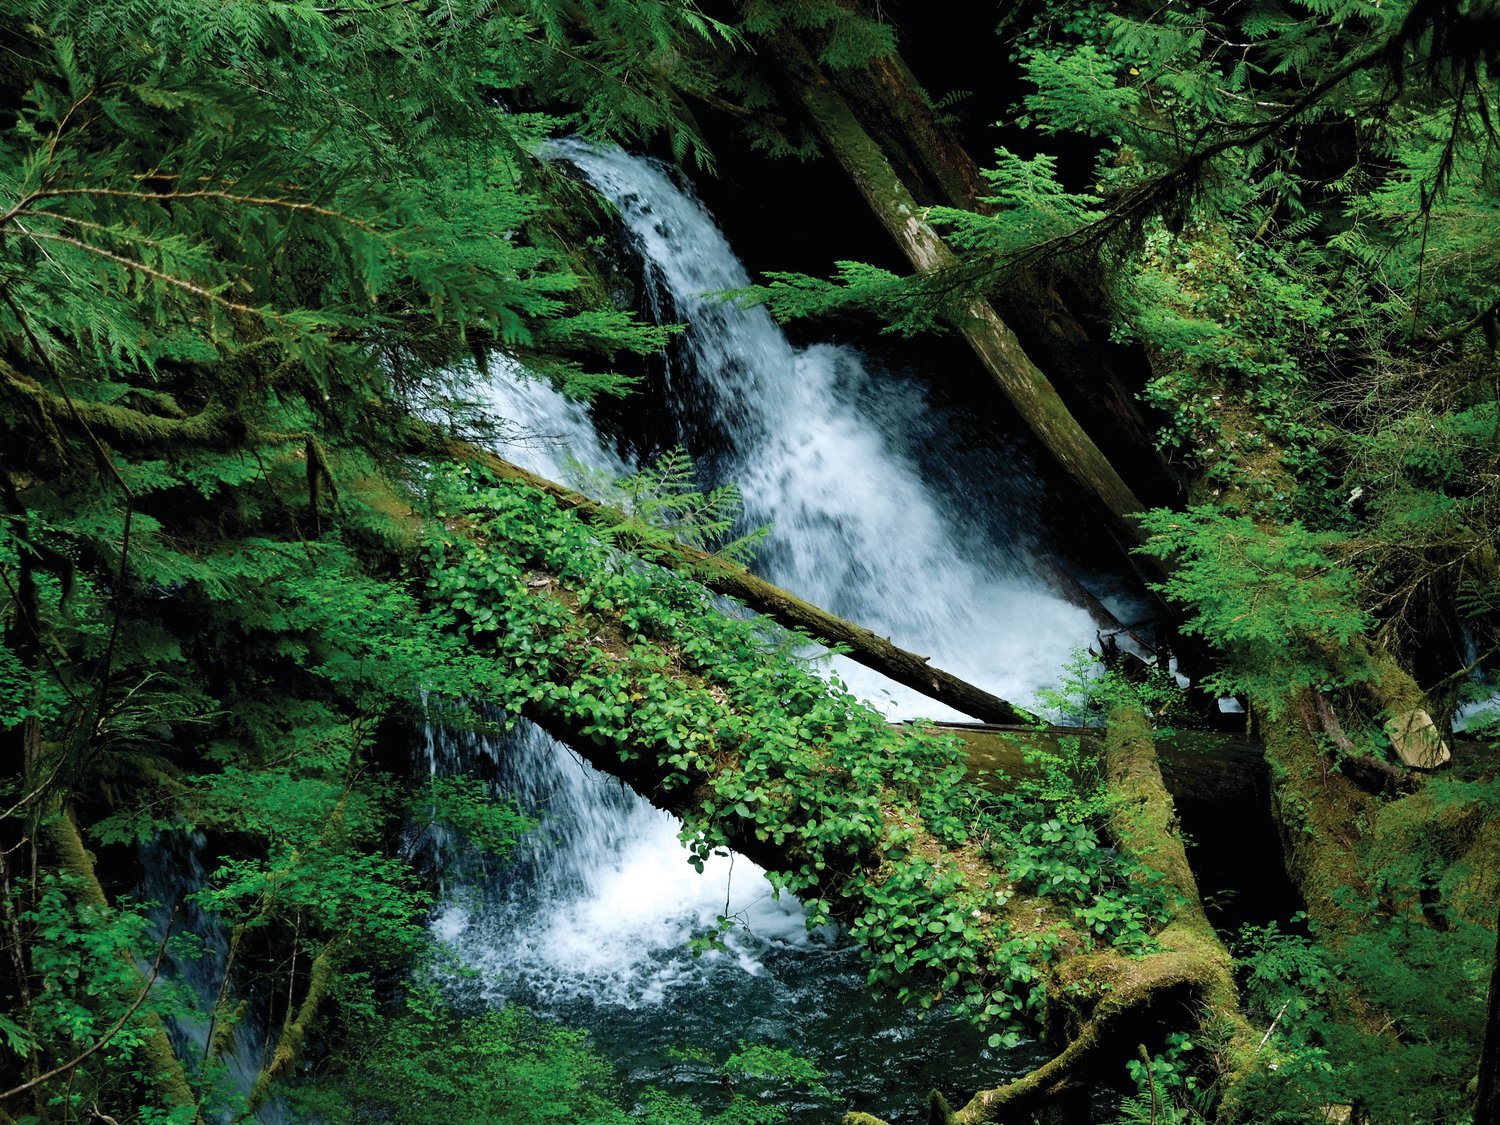 Enjoy lush forest and plenty of running water while hiking the Olympic Peninsula with a group of like-minded hikers.